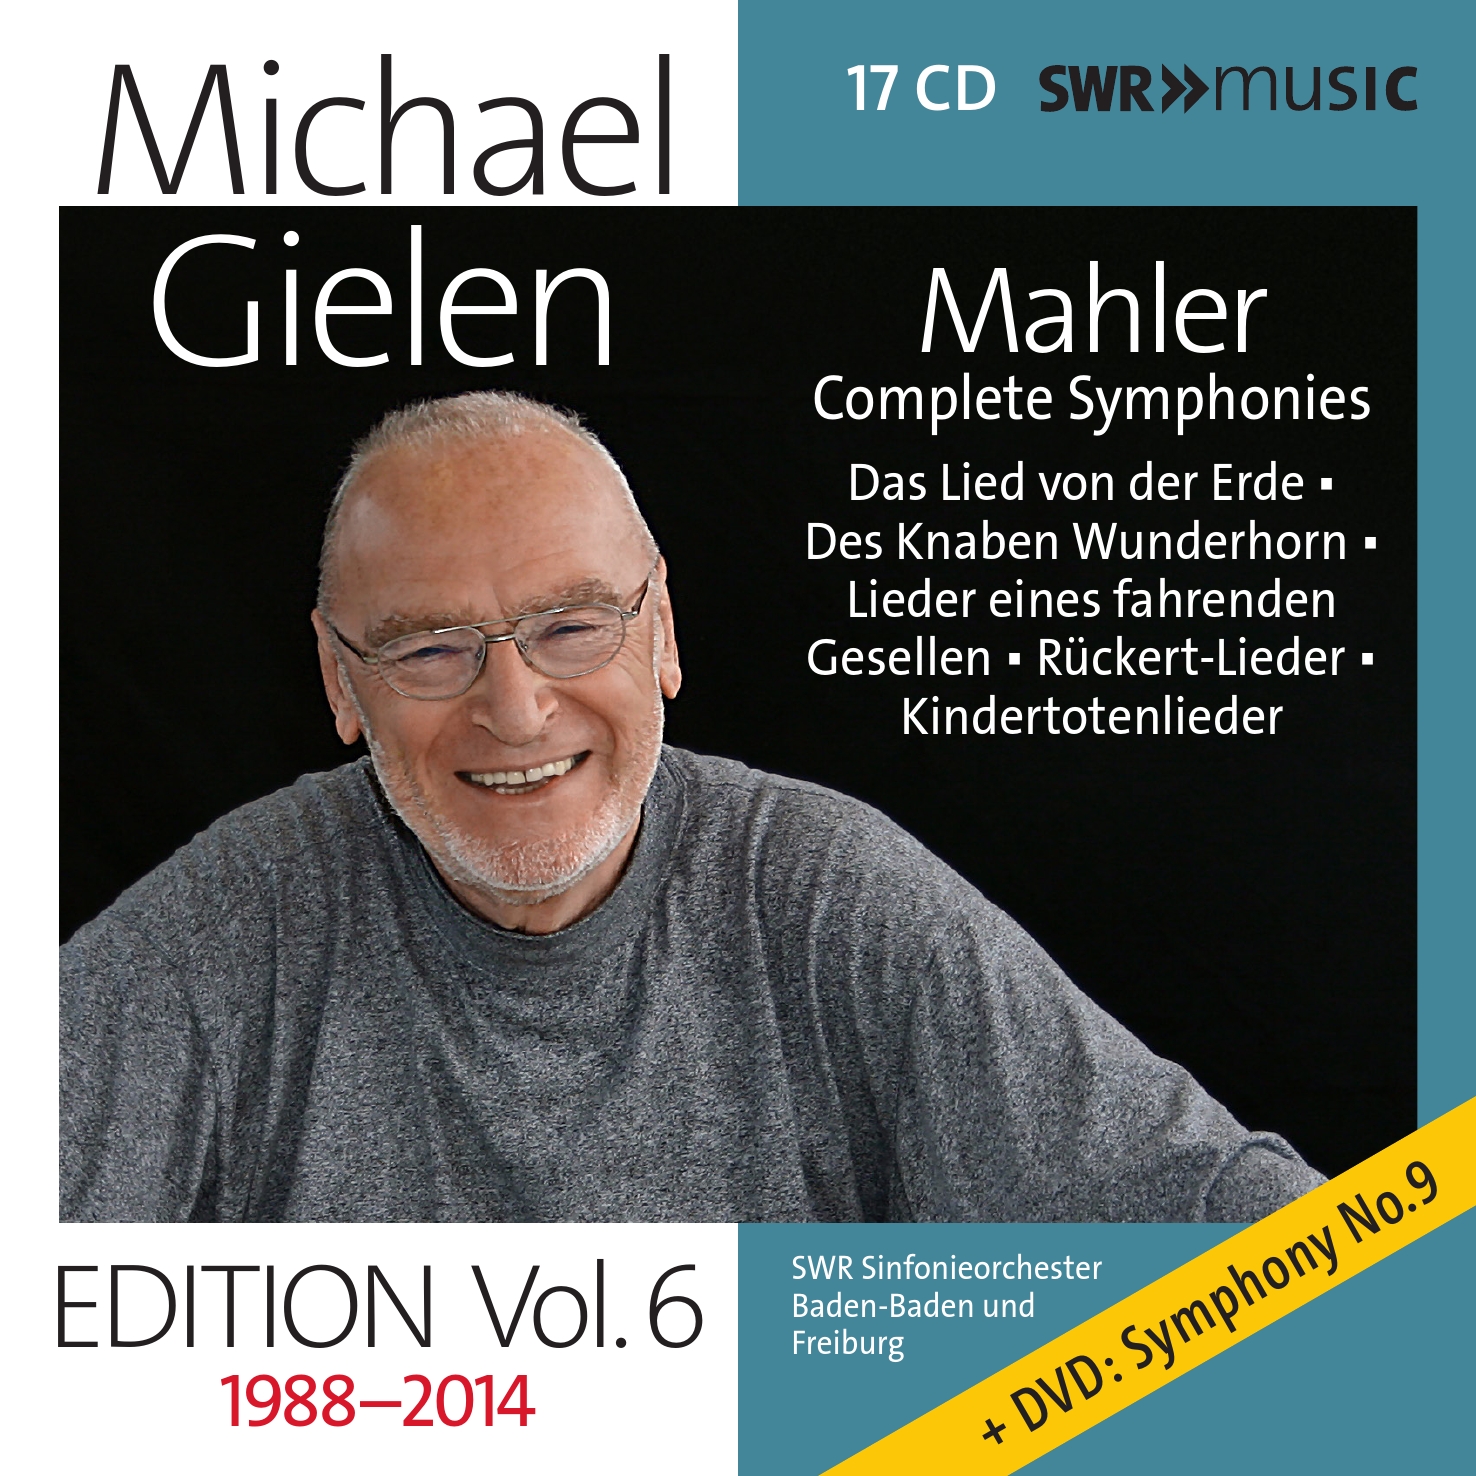 Michael Gielen Ed - Vol 6 Mahler Symphonies and. Song Cycles Recorded 1988-2014 cd16